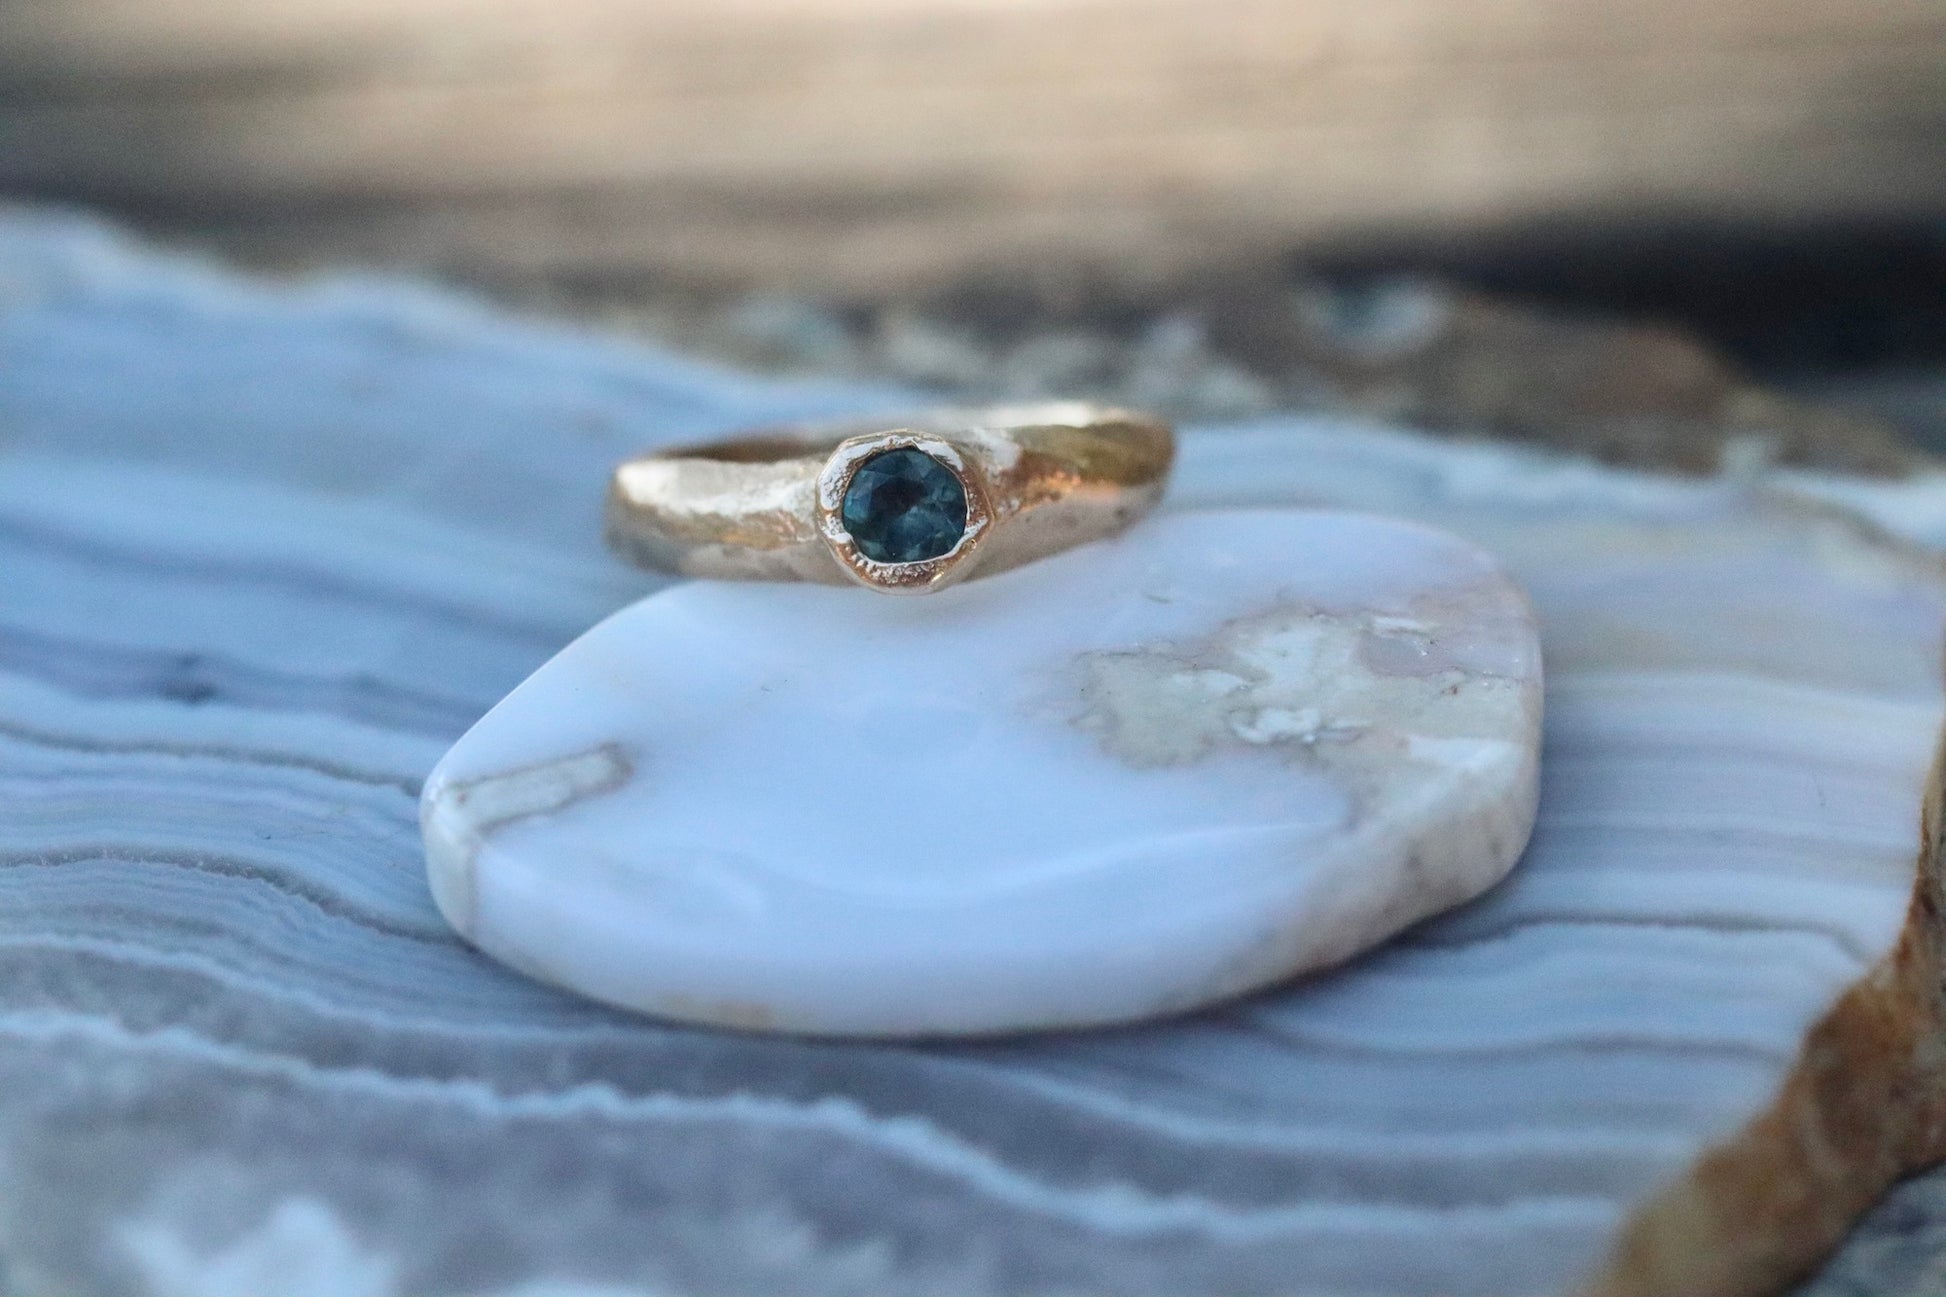 rustic organic sandcast solitaire ring alternative engagement 14kt recycled gold montana sapphire